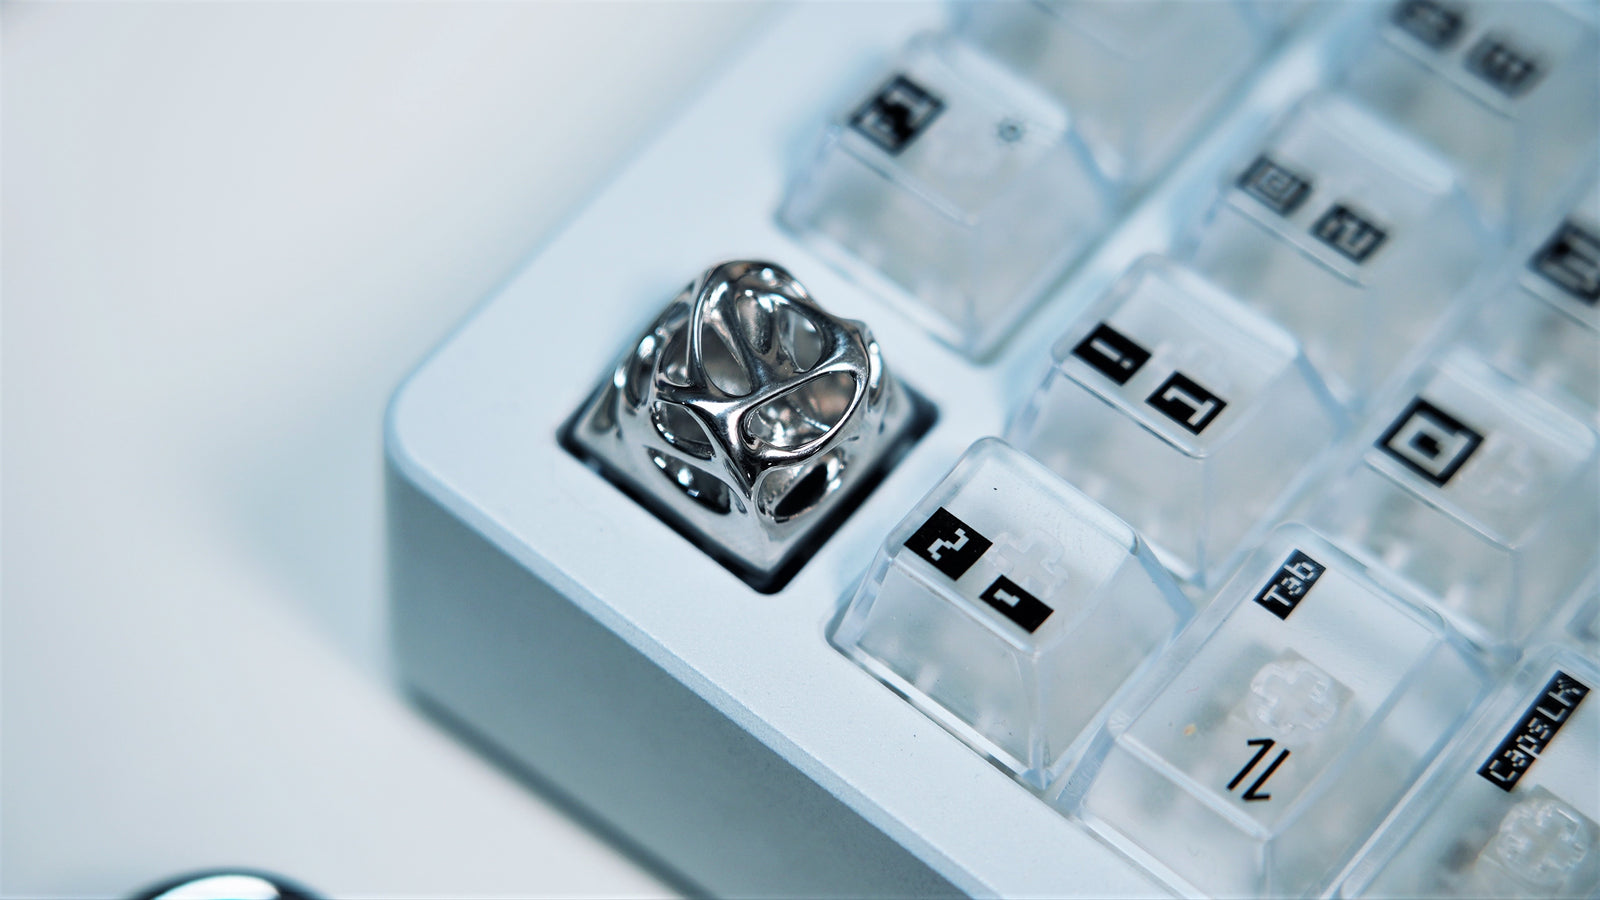 [In Stock] Silver Grind Artisan Keycap (Free Shipping To Some Countries)